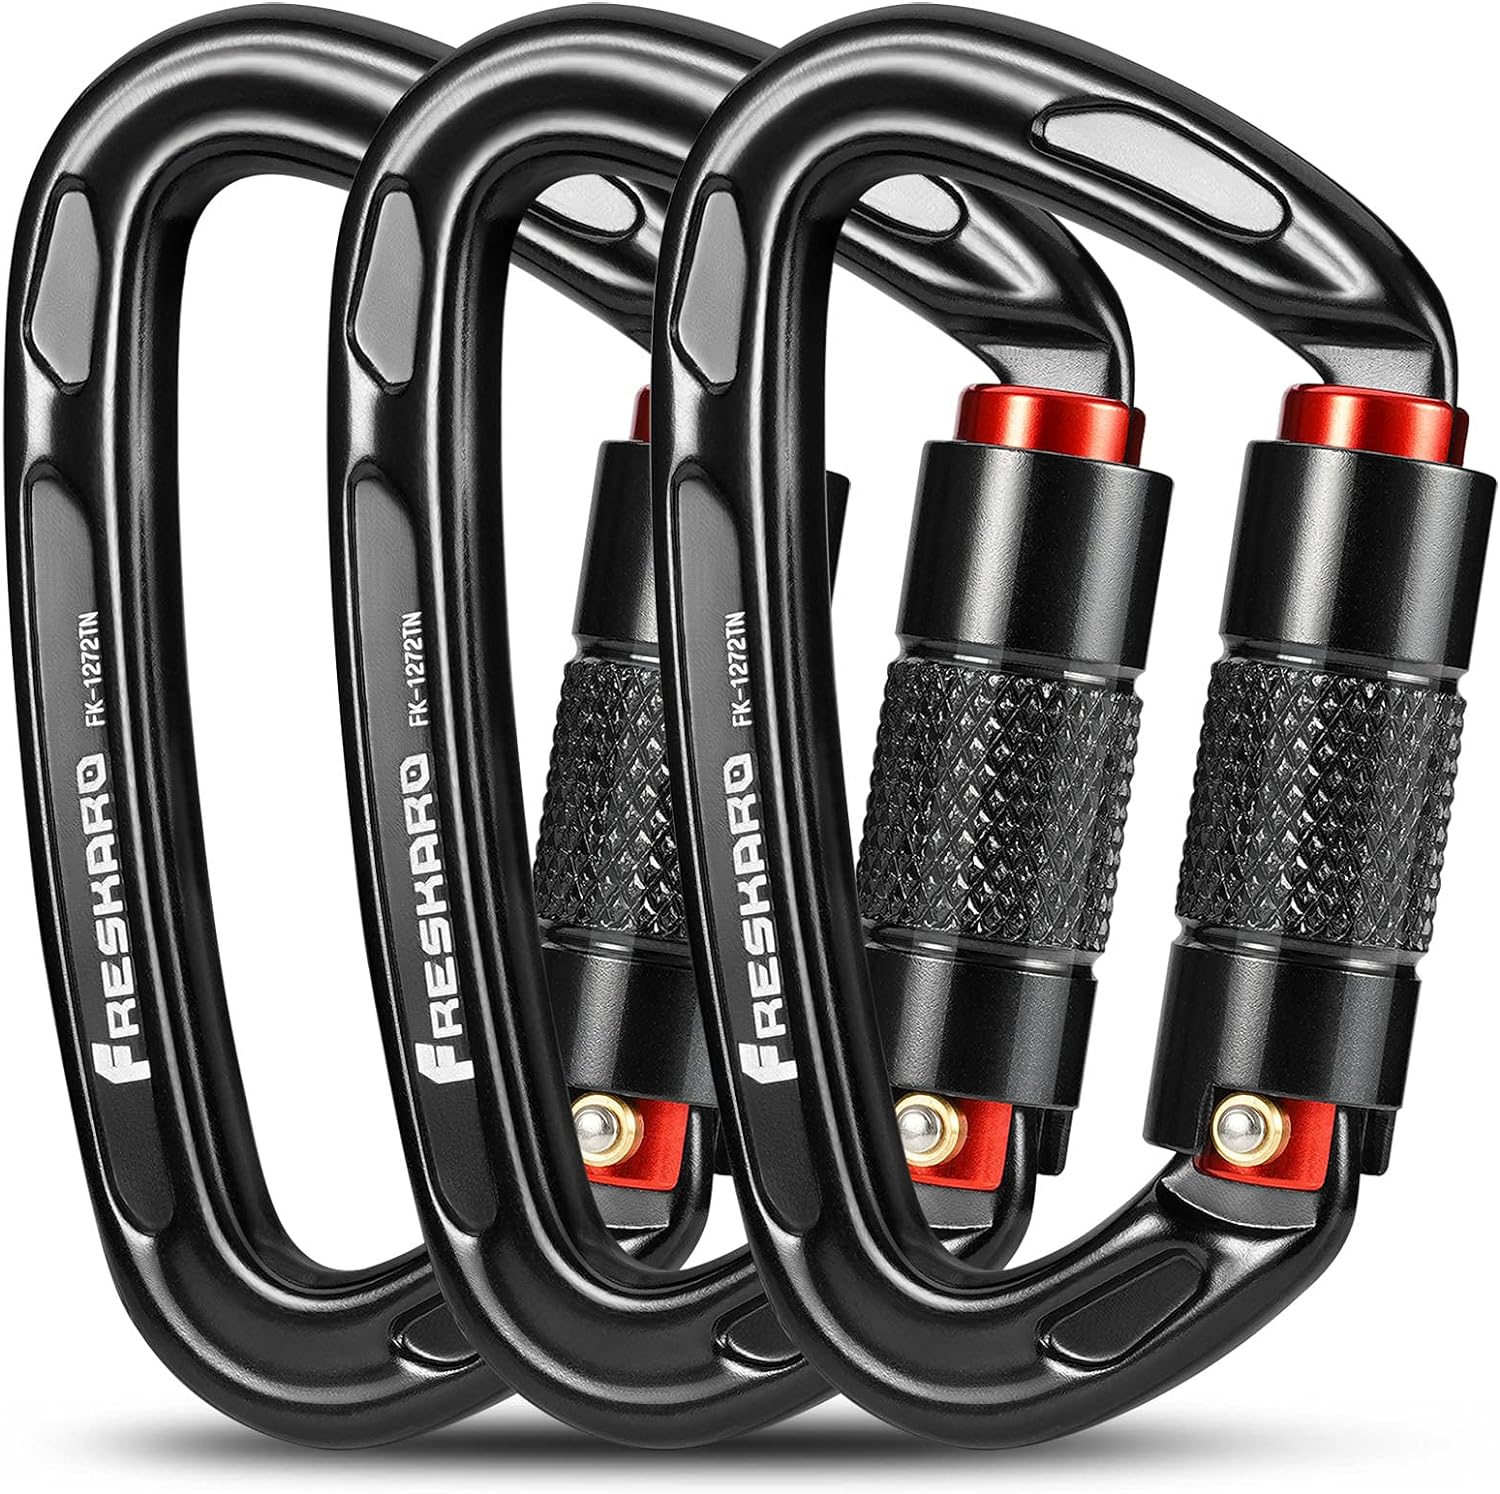 1 pk O-Shaped Steel Climbing Carabiner 25kn=5600lb Screw Lock Spring Gate Protection,CE Rated Heavy Duty Carabiners For Rock Climbing etc.